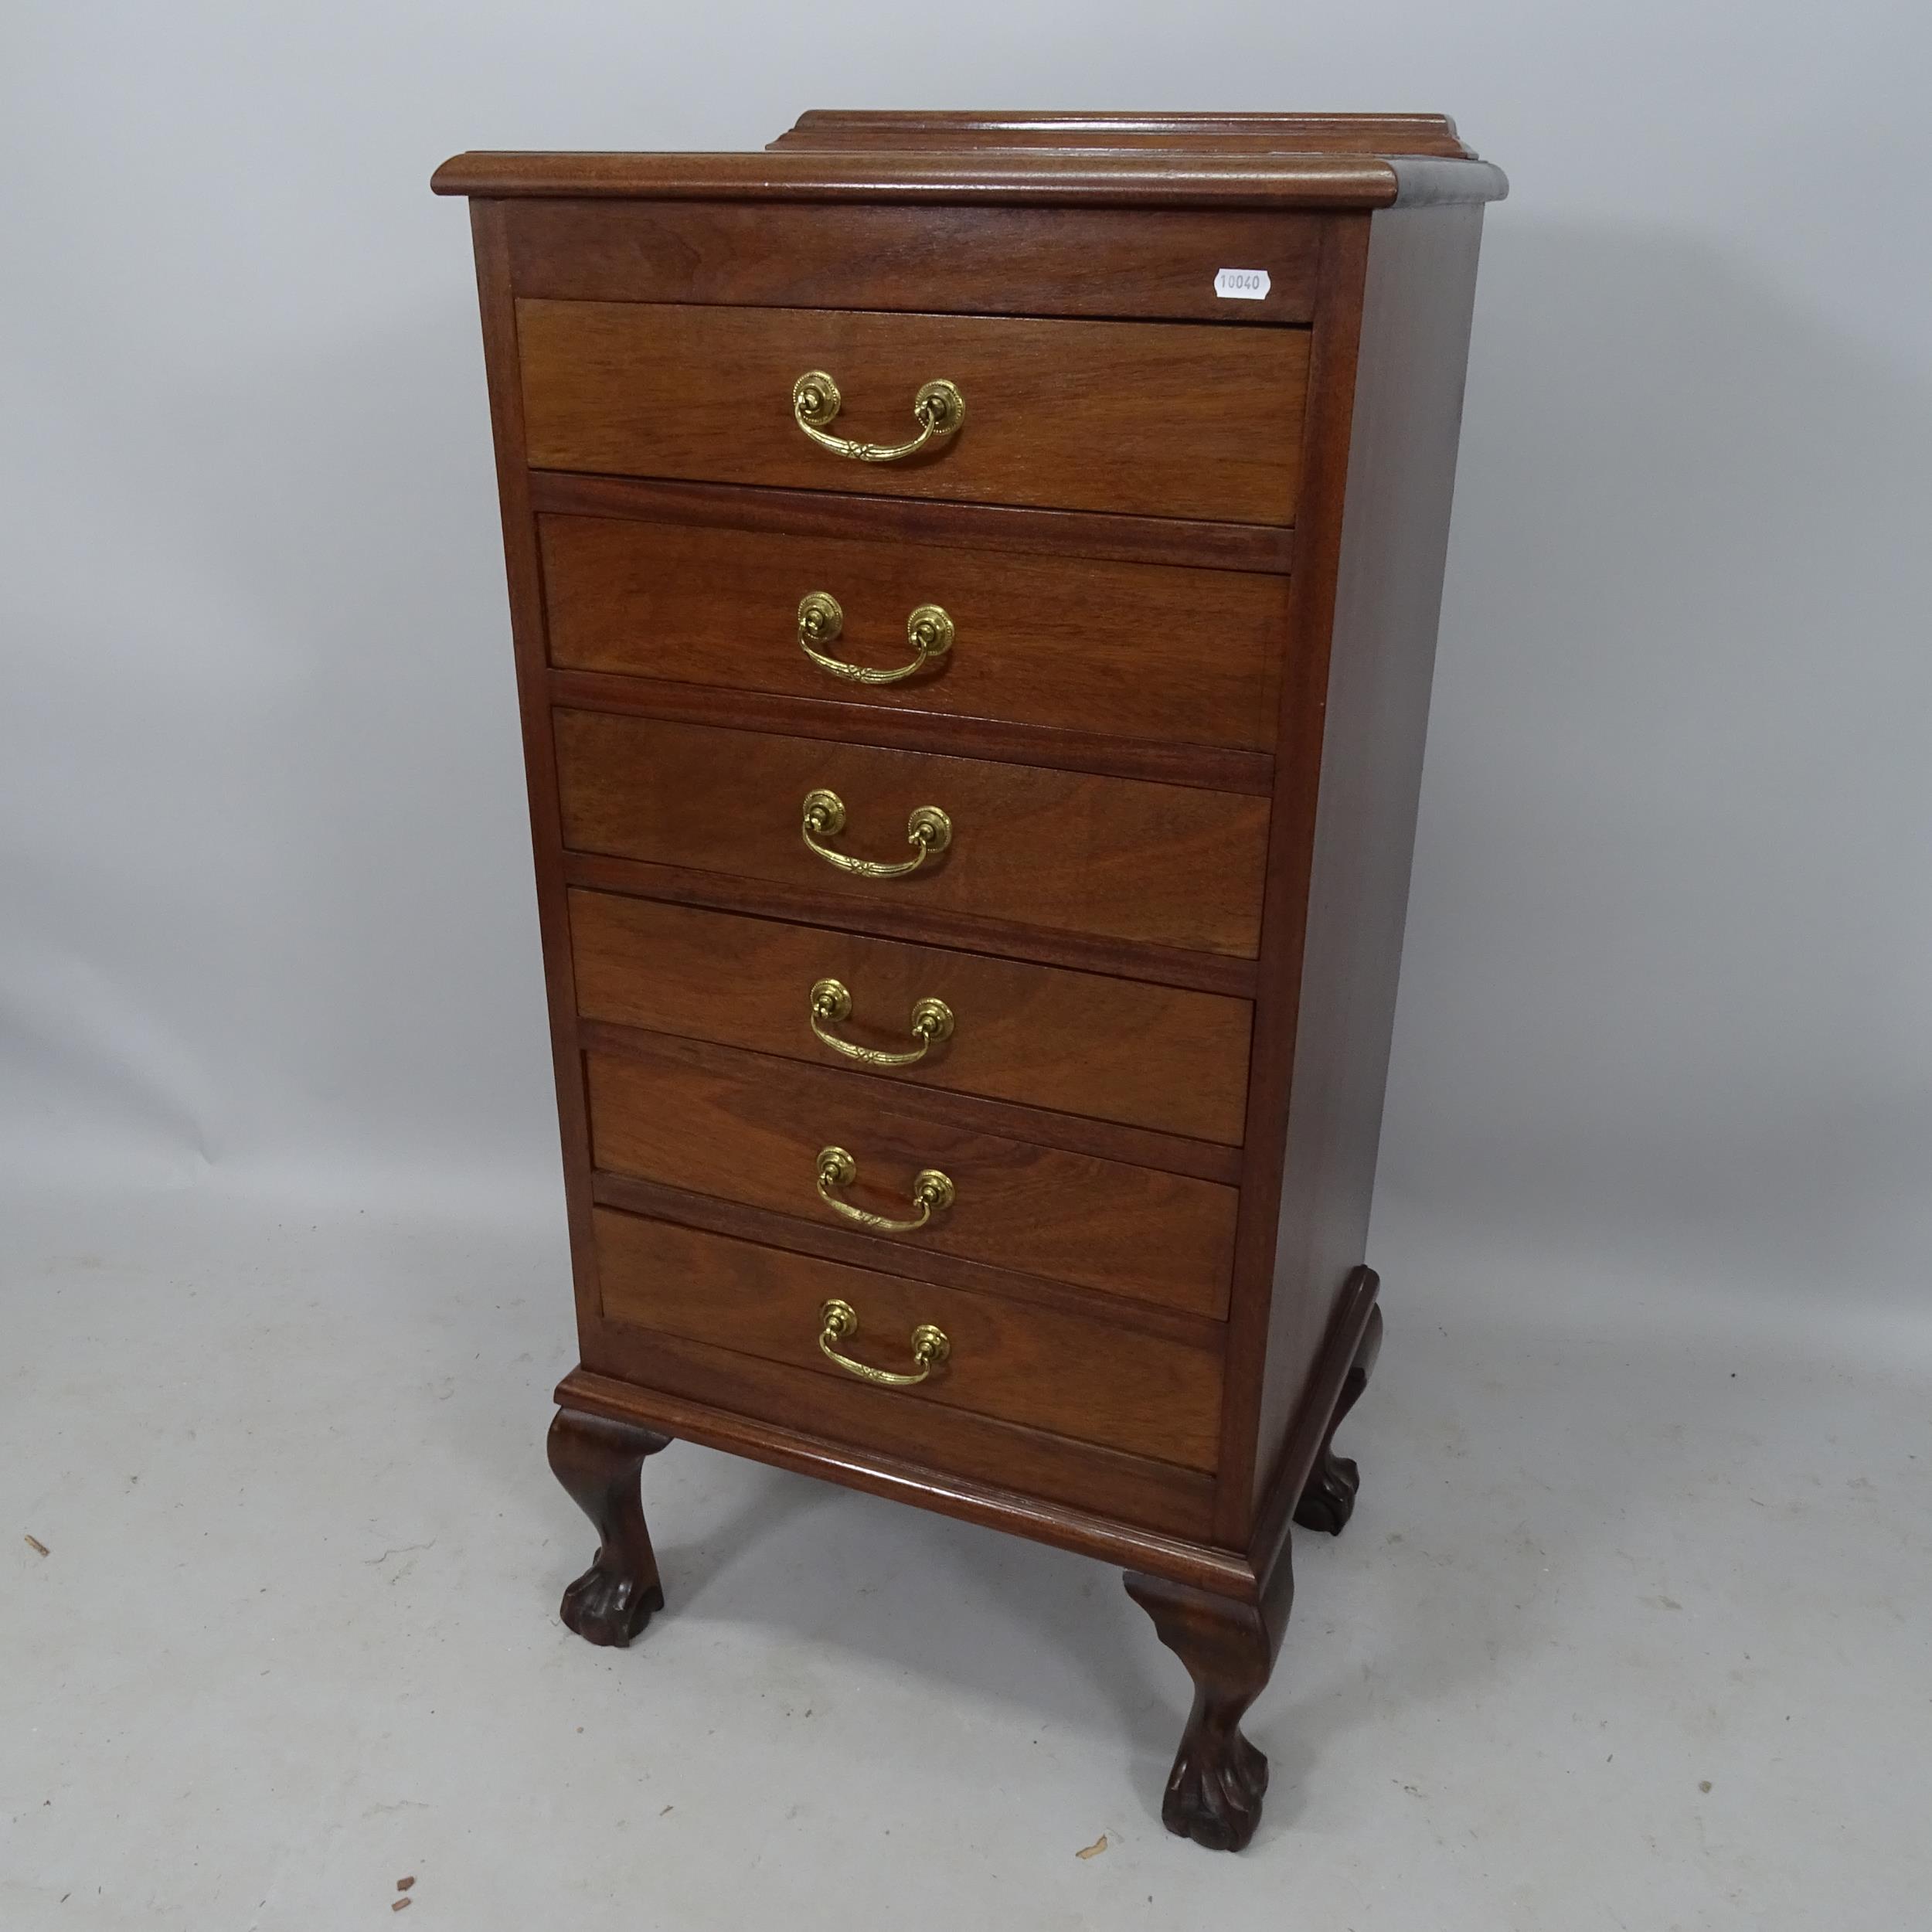 A reproduction mahogany chest of 6 drawers, 51 x 105cm